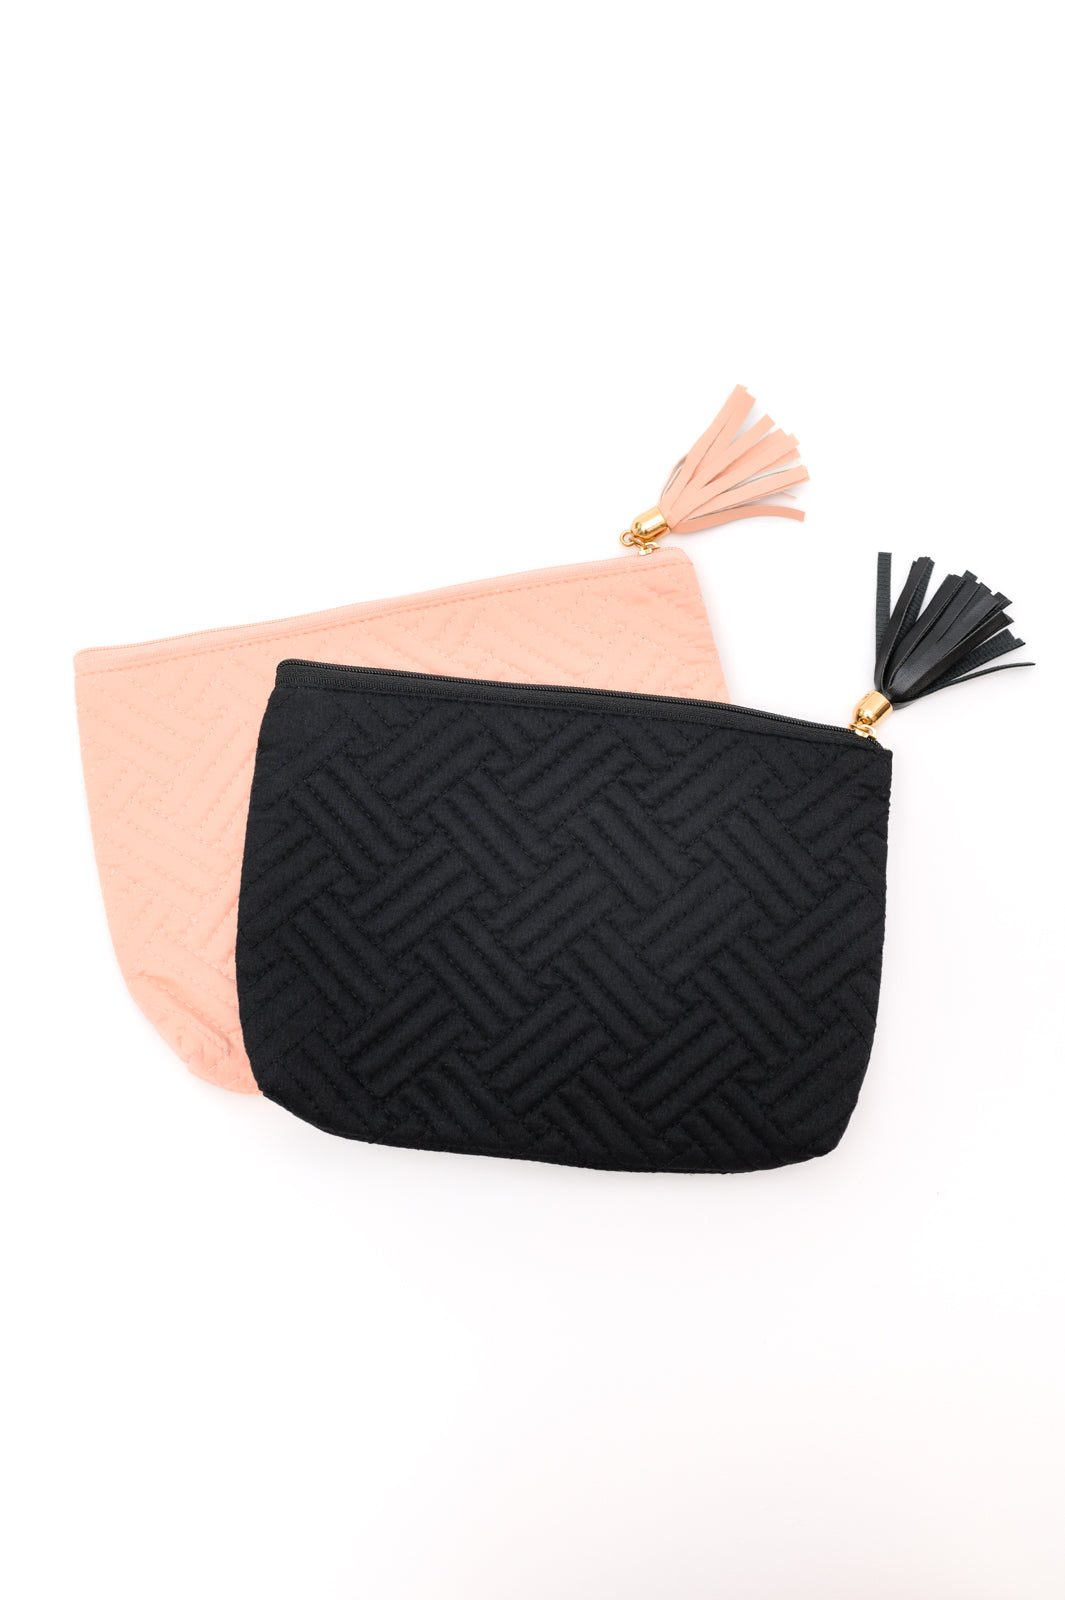 Quilted Travel Zip Pouch in Black - OS Womens